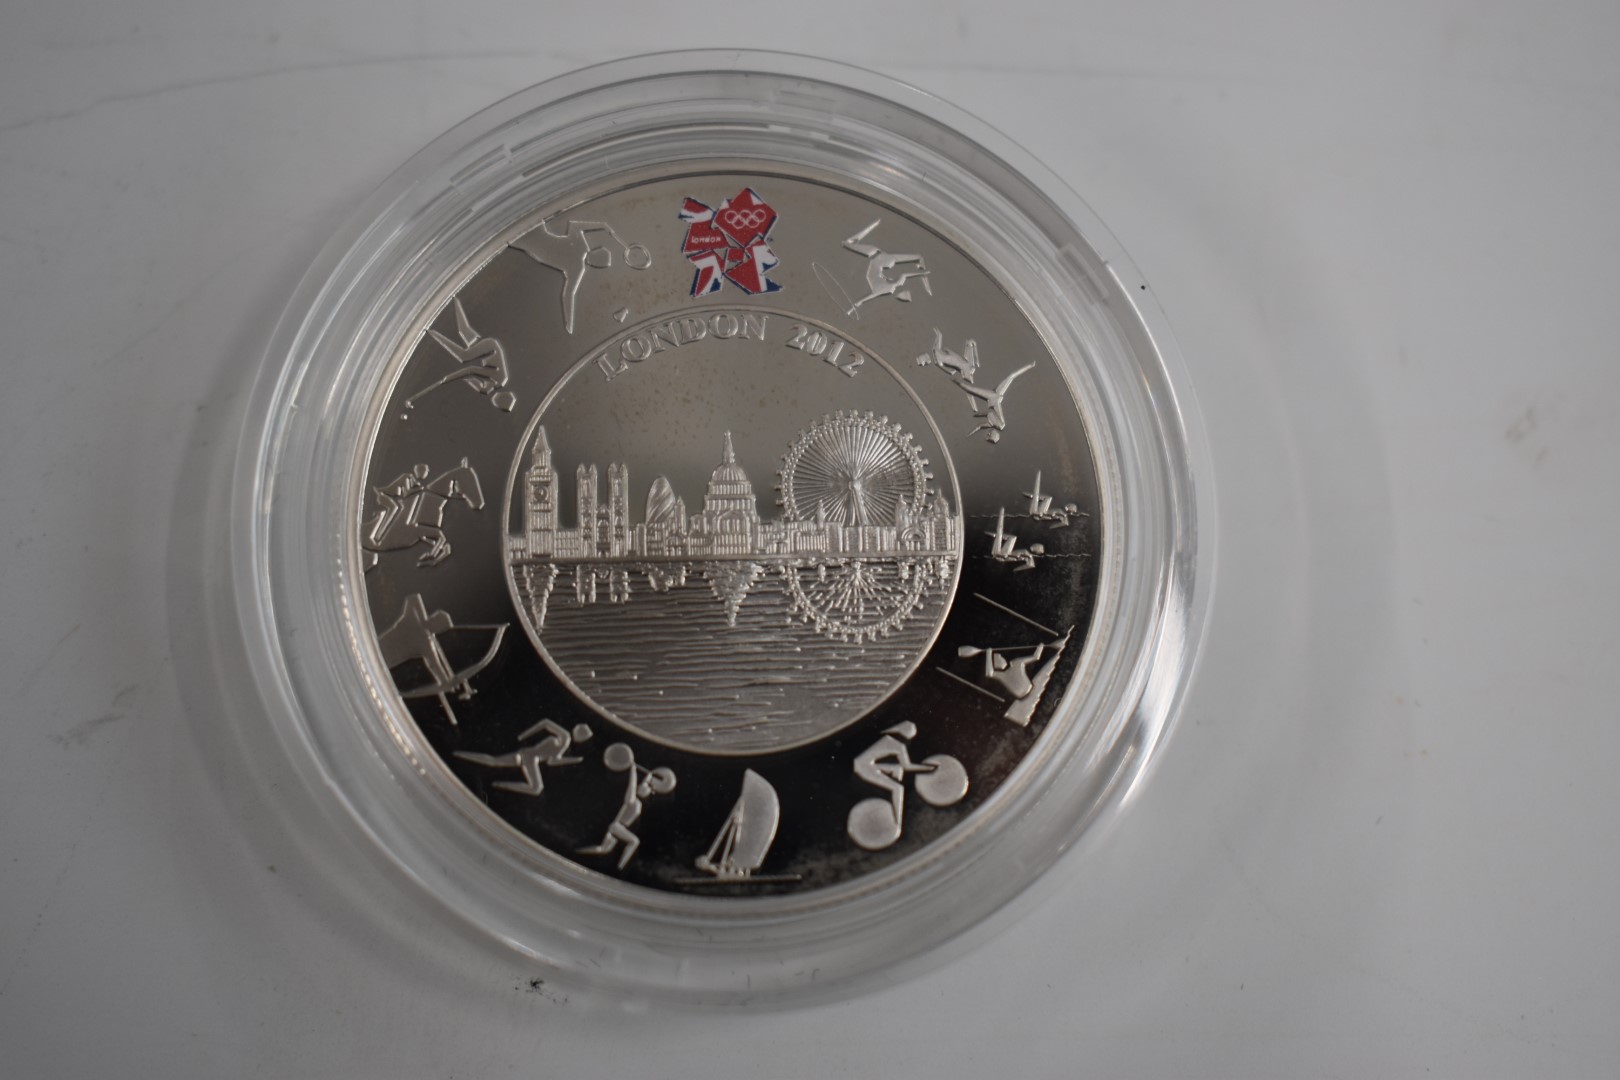 Royal Mint London 2012 £5 silver proof coin, cased with certificate - Image 2 of 3